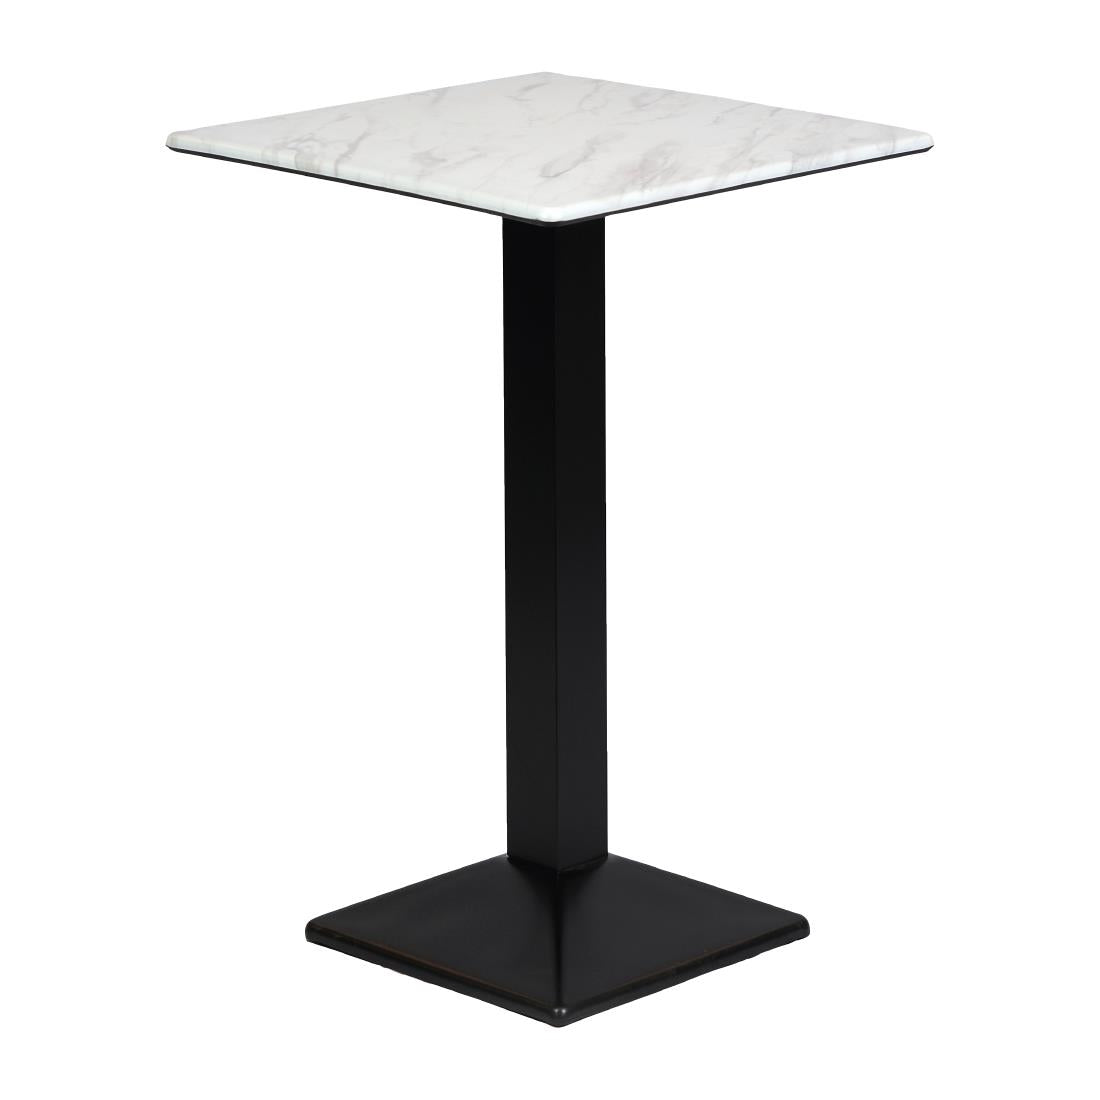 CZ830 Turin Metal Base Square Poseur Table with Laminate Top Marble 700mm JD Catering Equipment Solutions Ltd